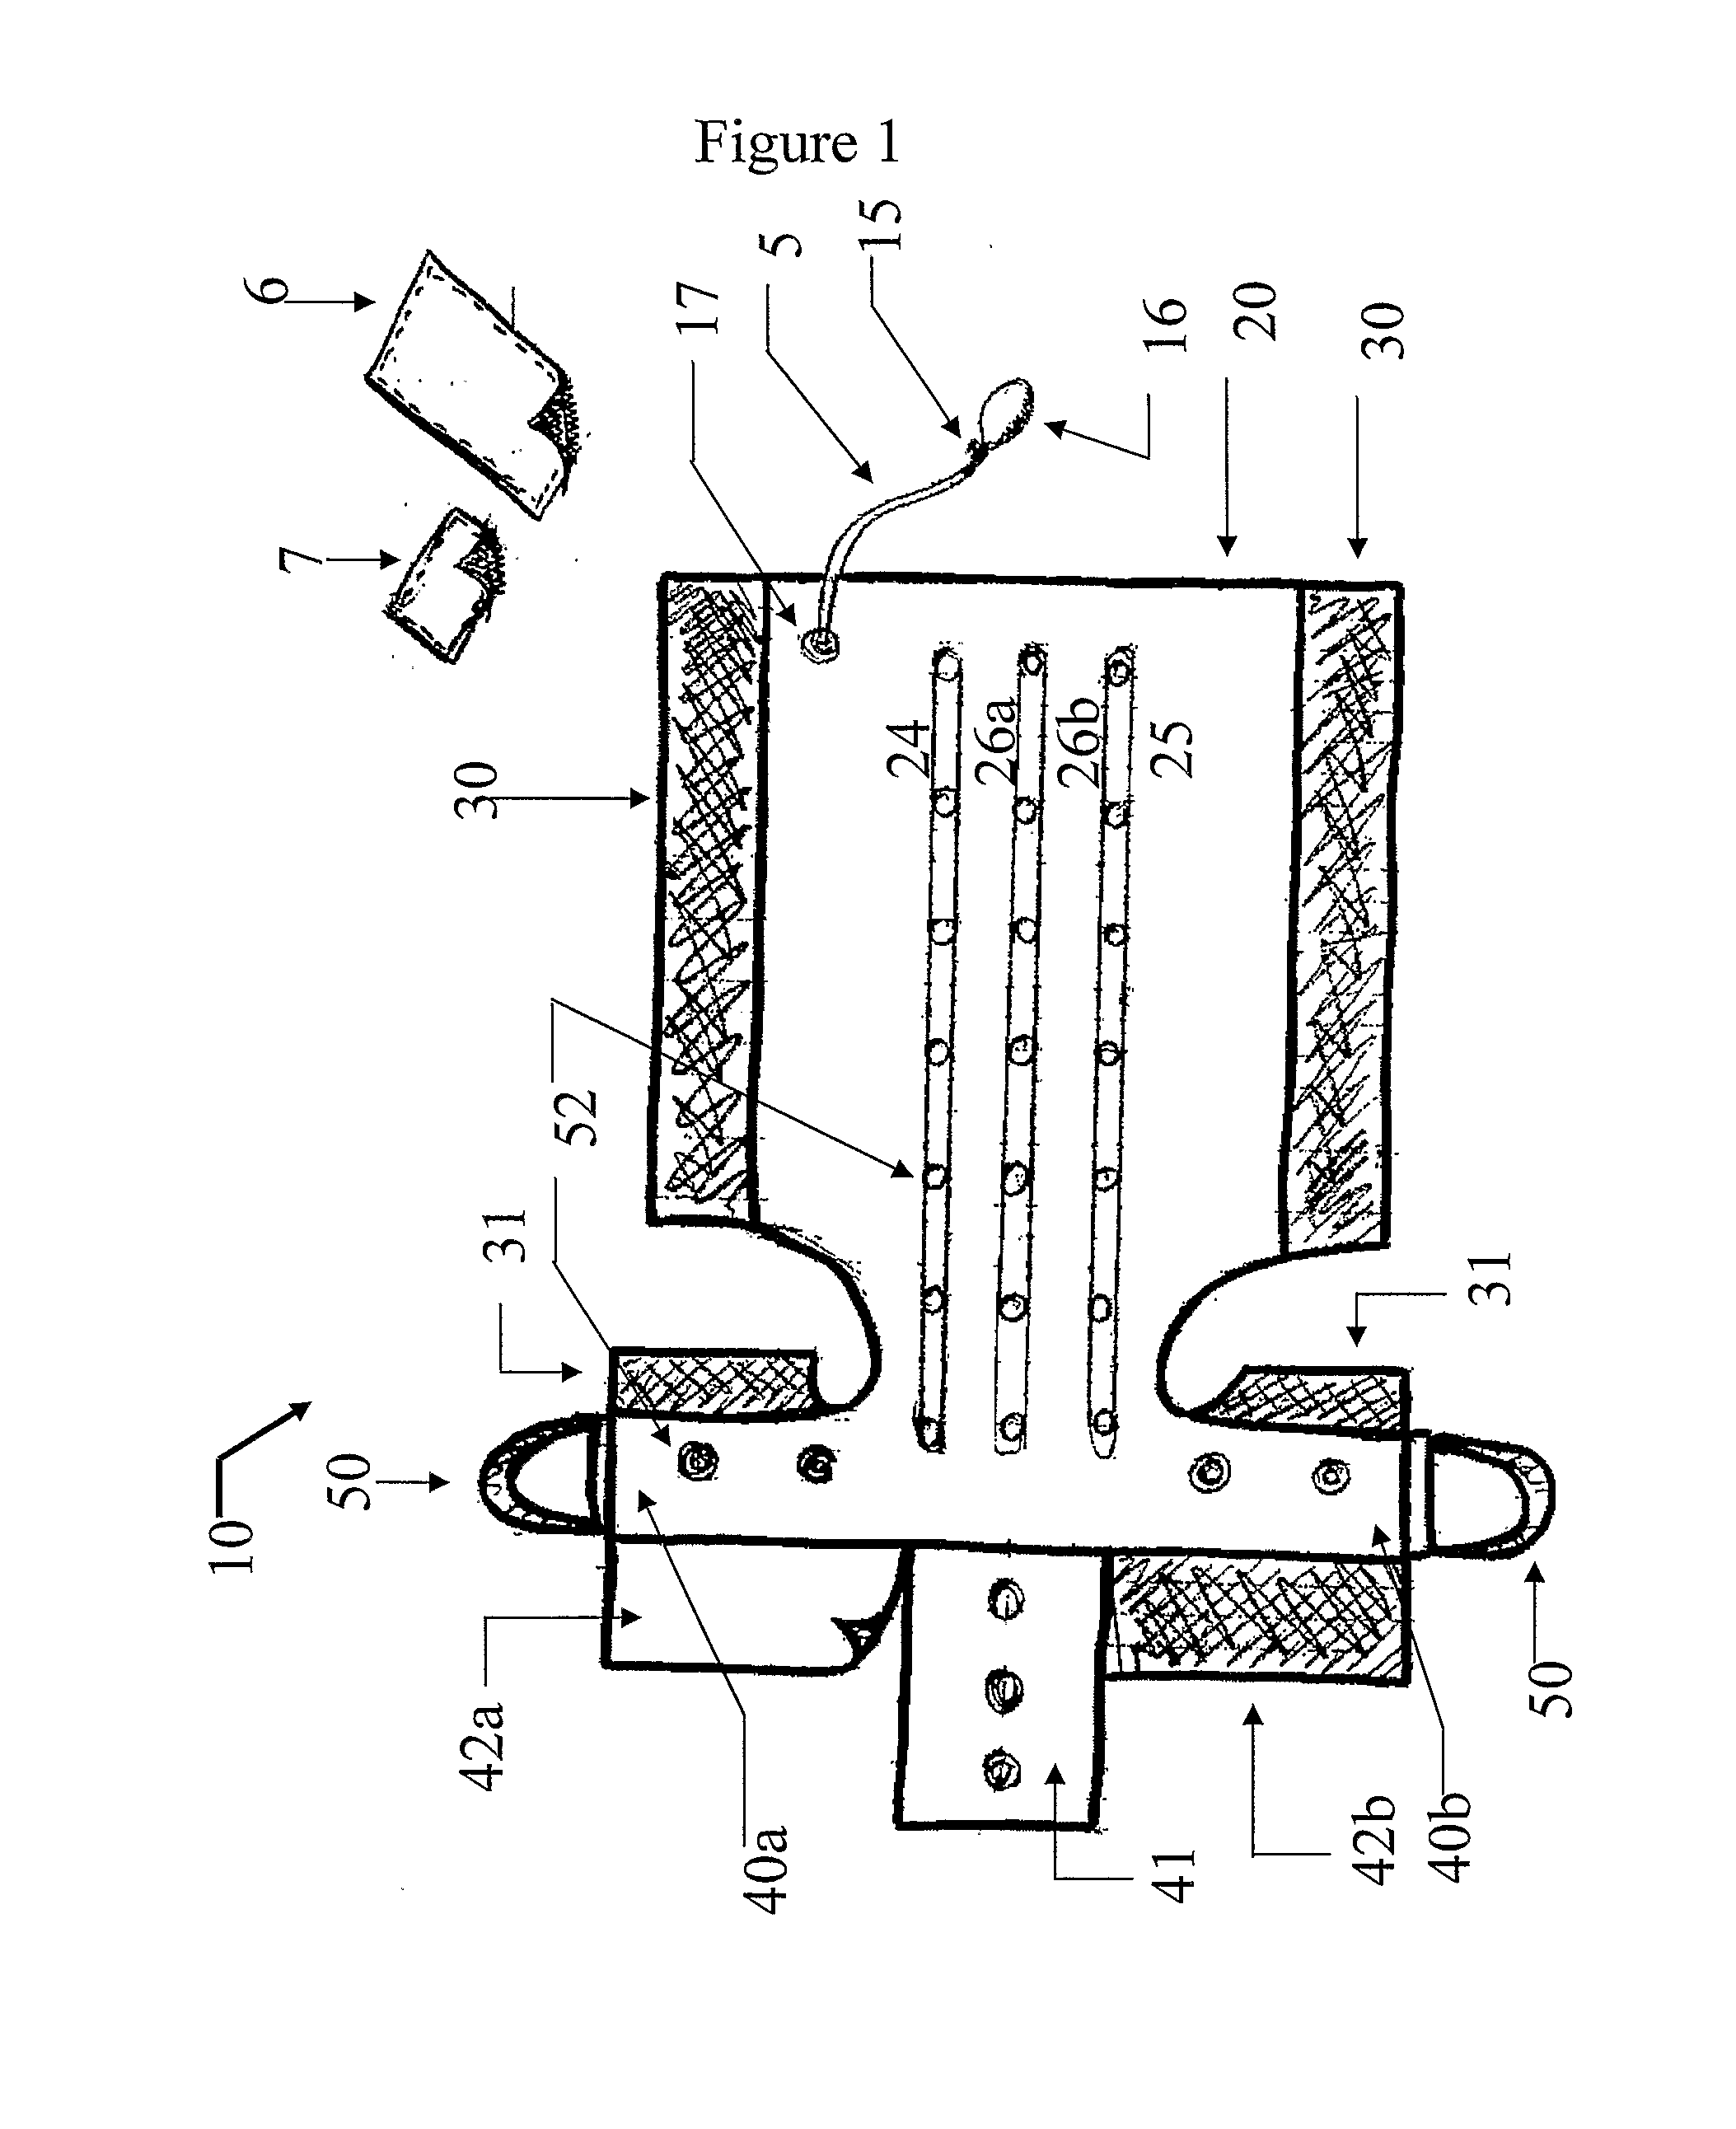 Immobilizing and Supporting Inflatable Splint Apparatus